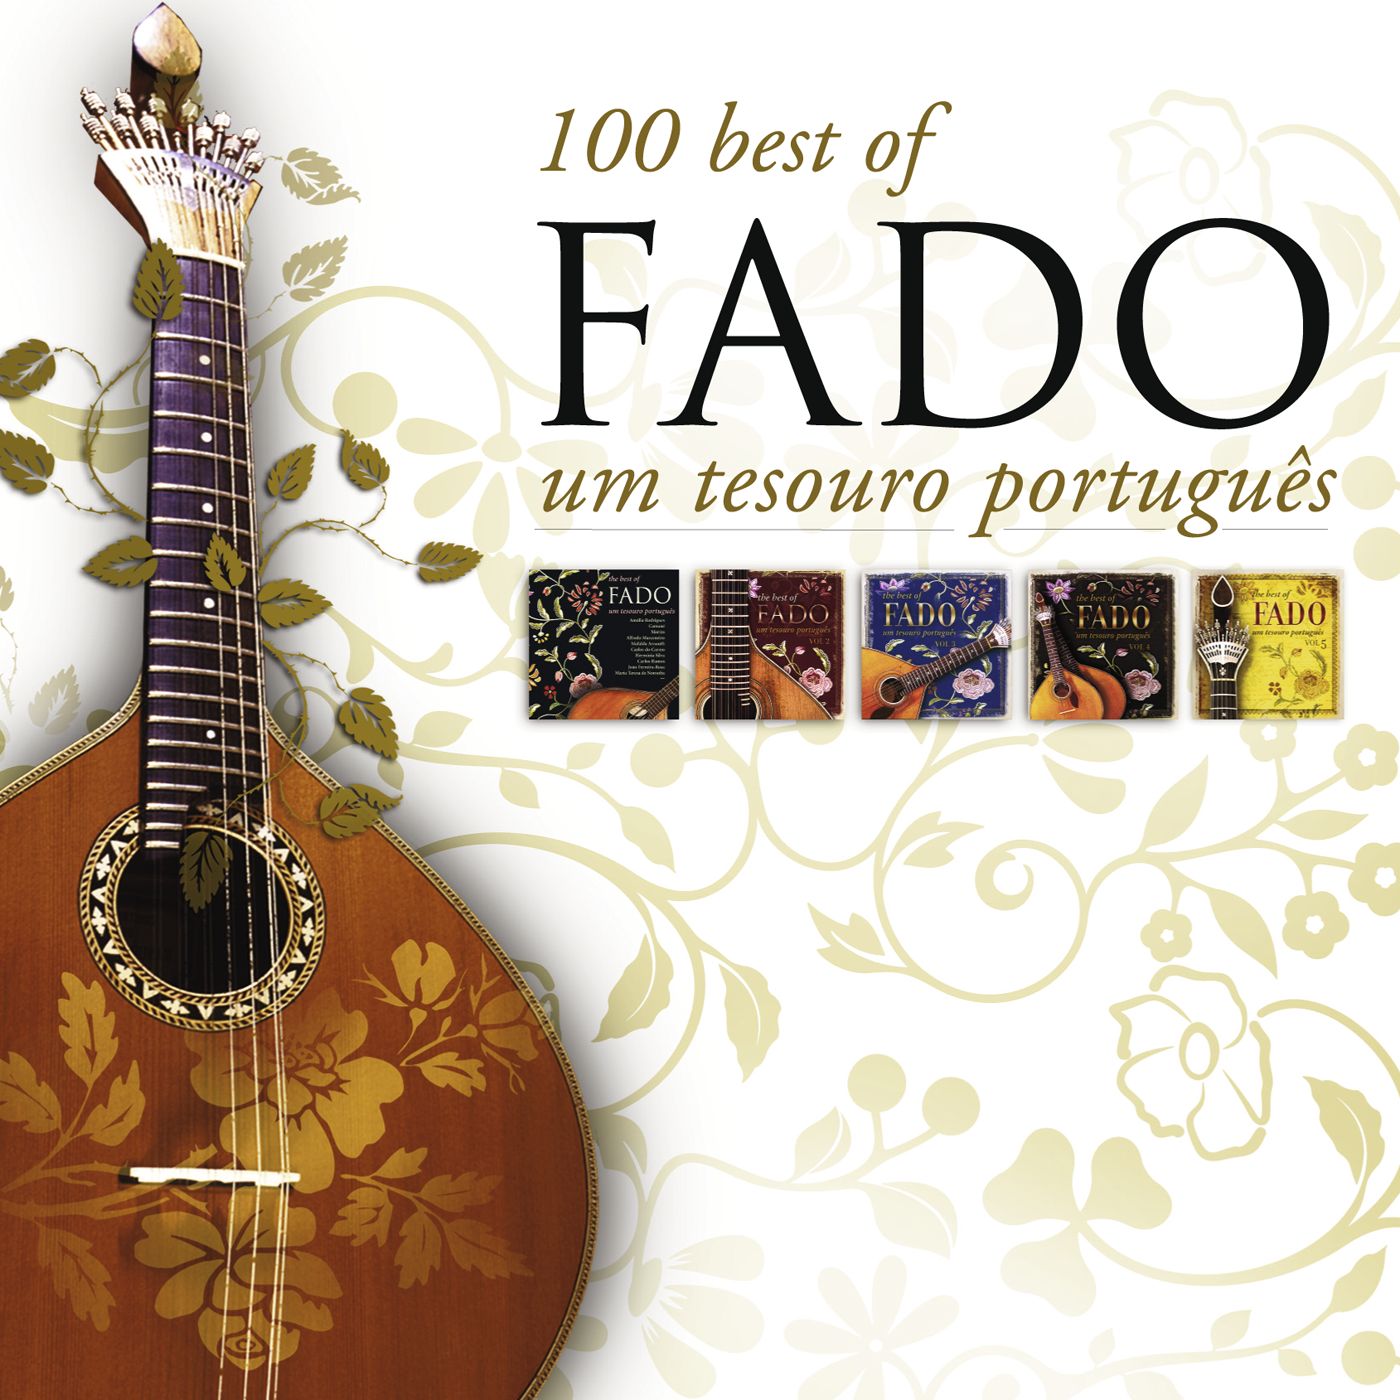 Best of Fado,the 